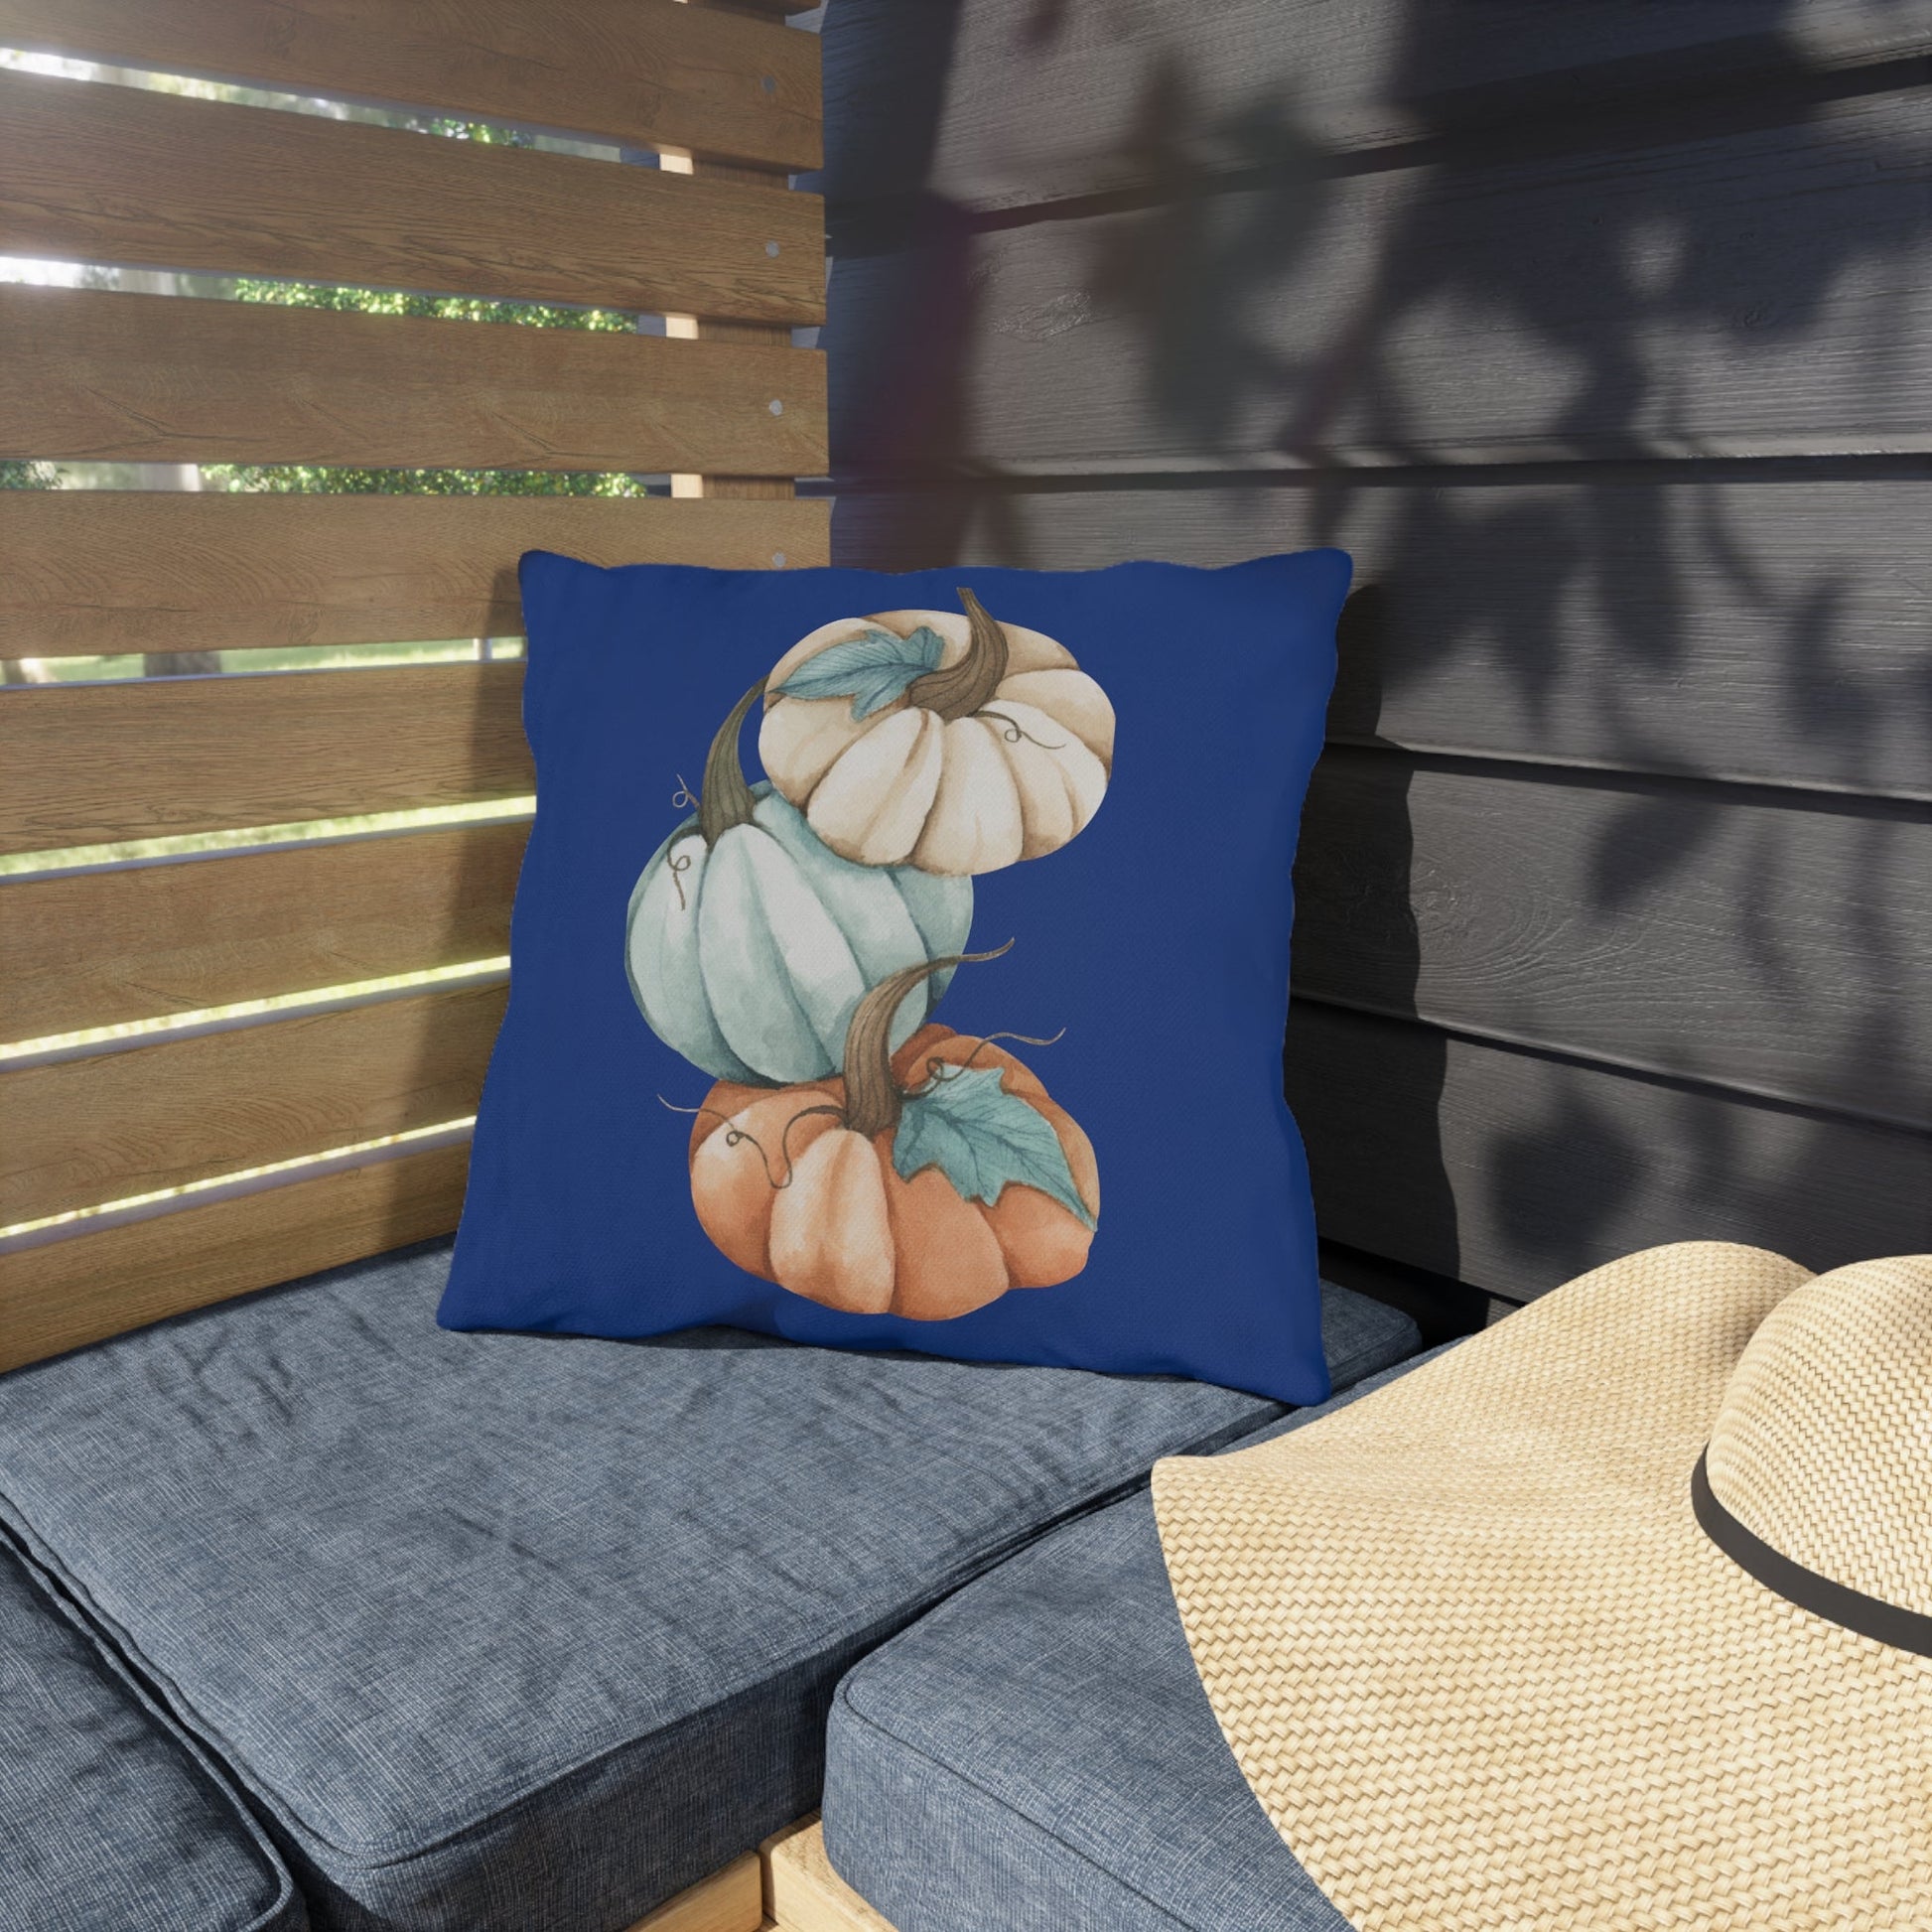 Get trendy with Fall-themed Outdoor Pillows - Home Decor available at Good Gift Company. Grab yours for $14 today!